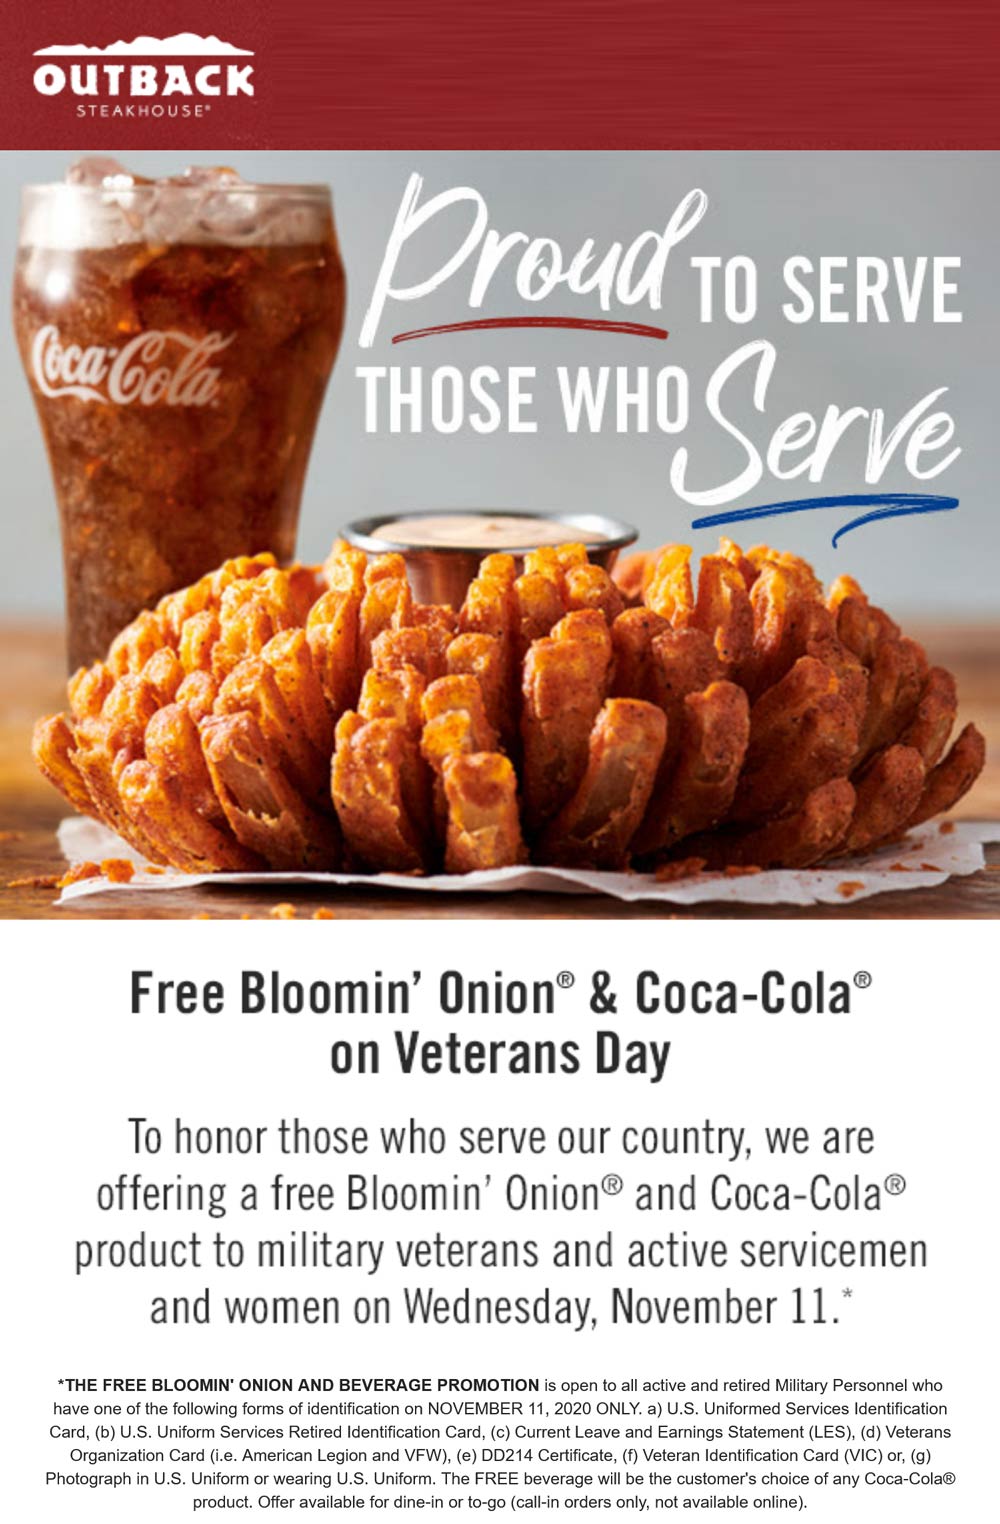 Outback Steakhouse restaurants Coupon  Military and veterans enjoy a free bloomin onion & drink Wednesday at Outback Steakhouse #outbacksteakhouse 